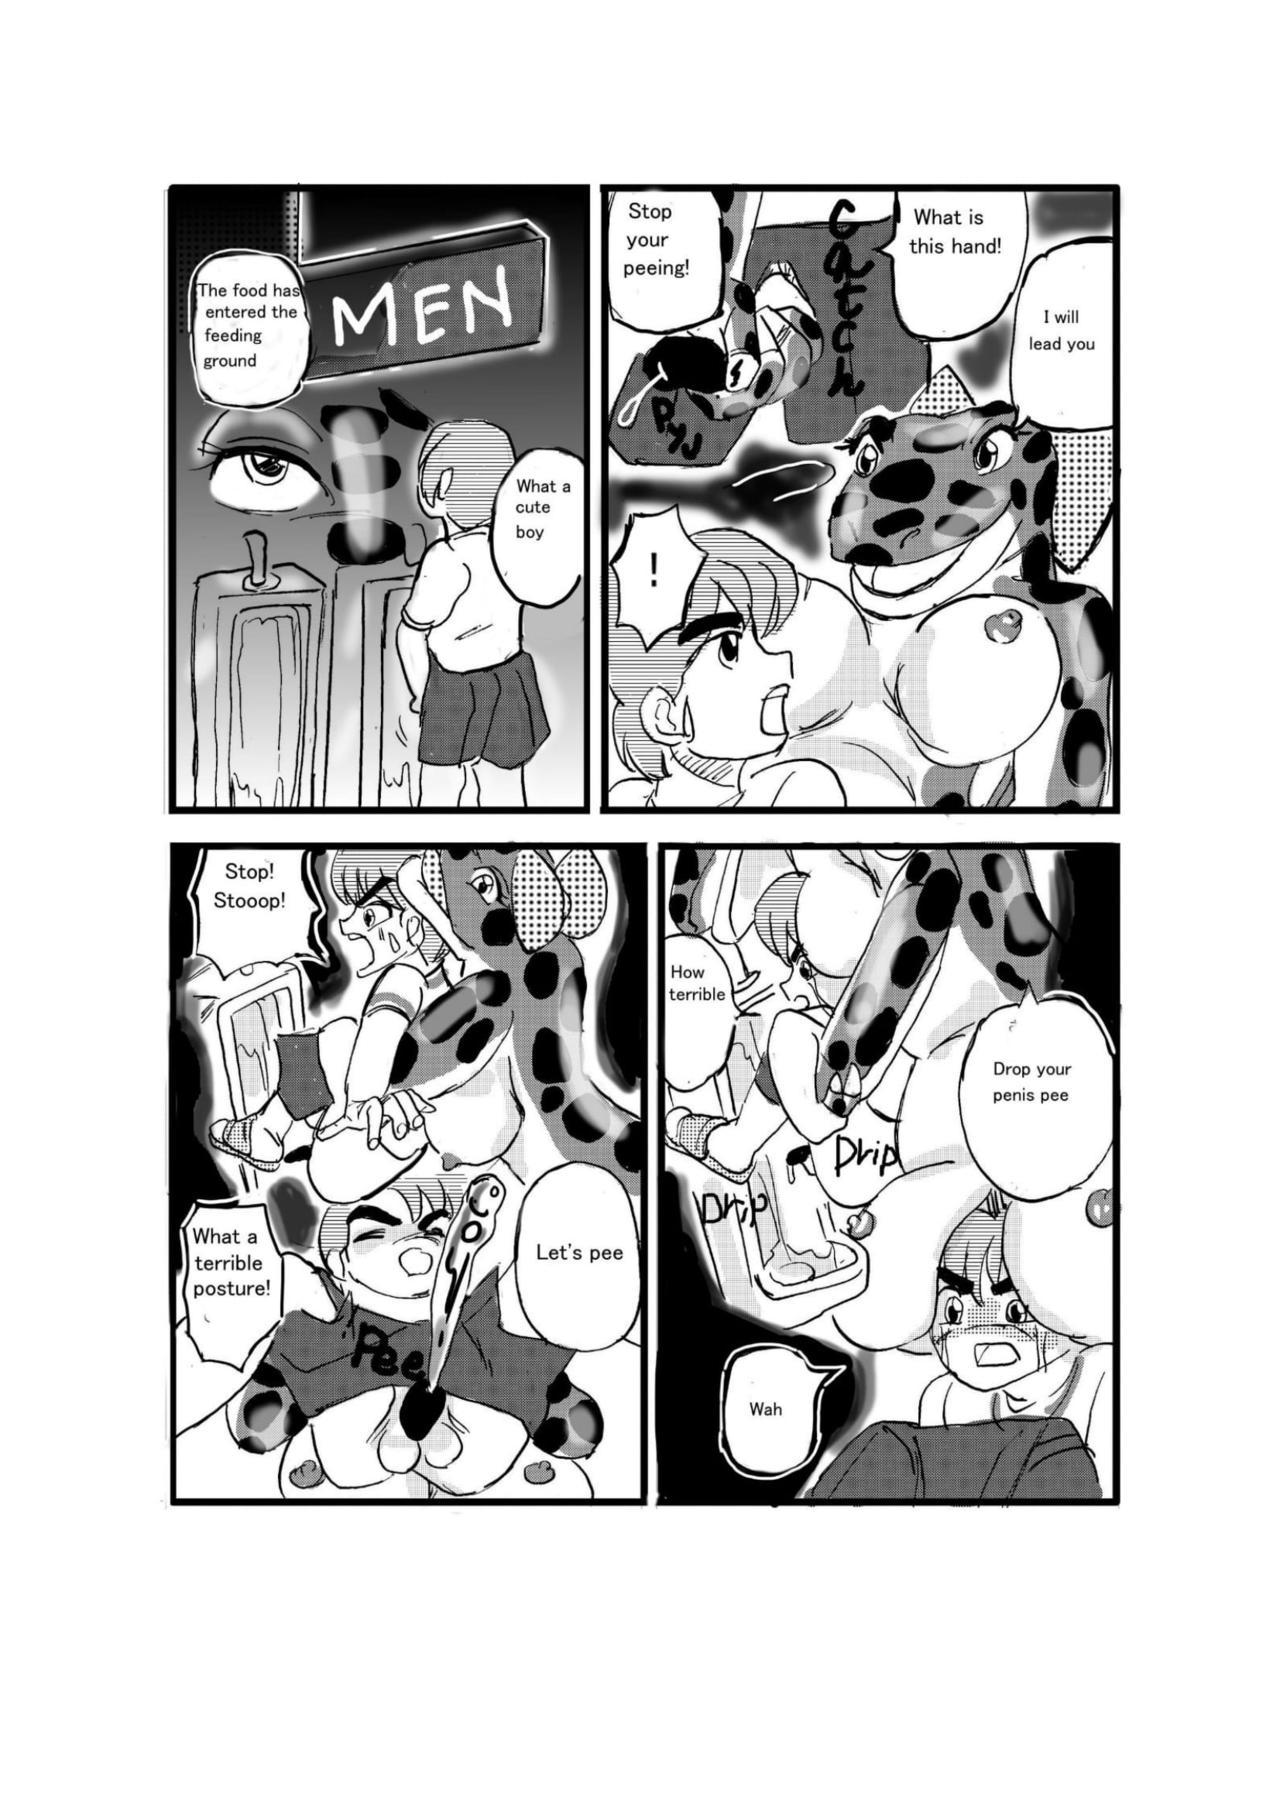 Sucks Swallowed Whole vol.2 Waniko + What's Digestion? - Original Point Of View - Page 3